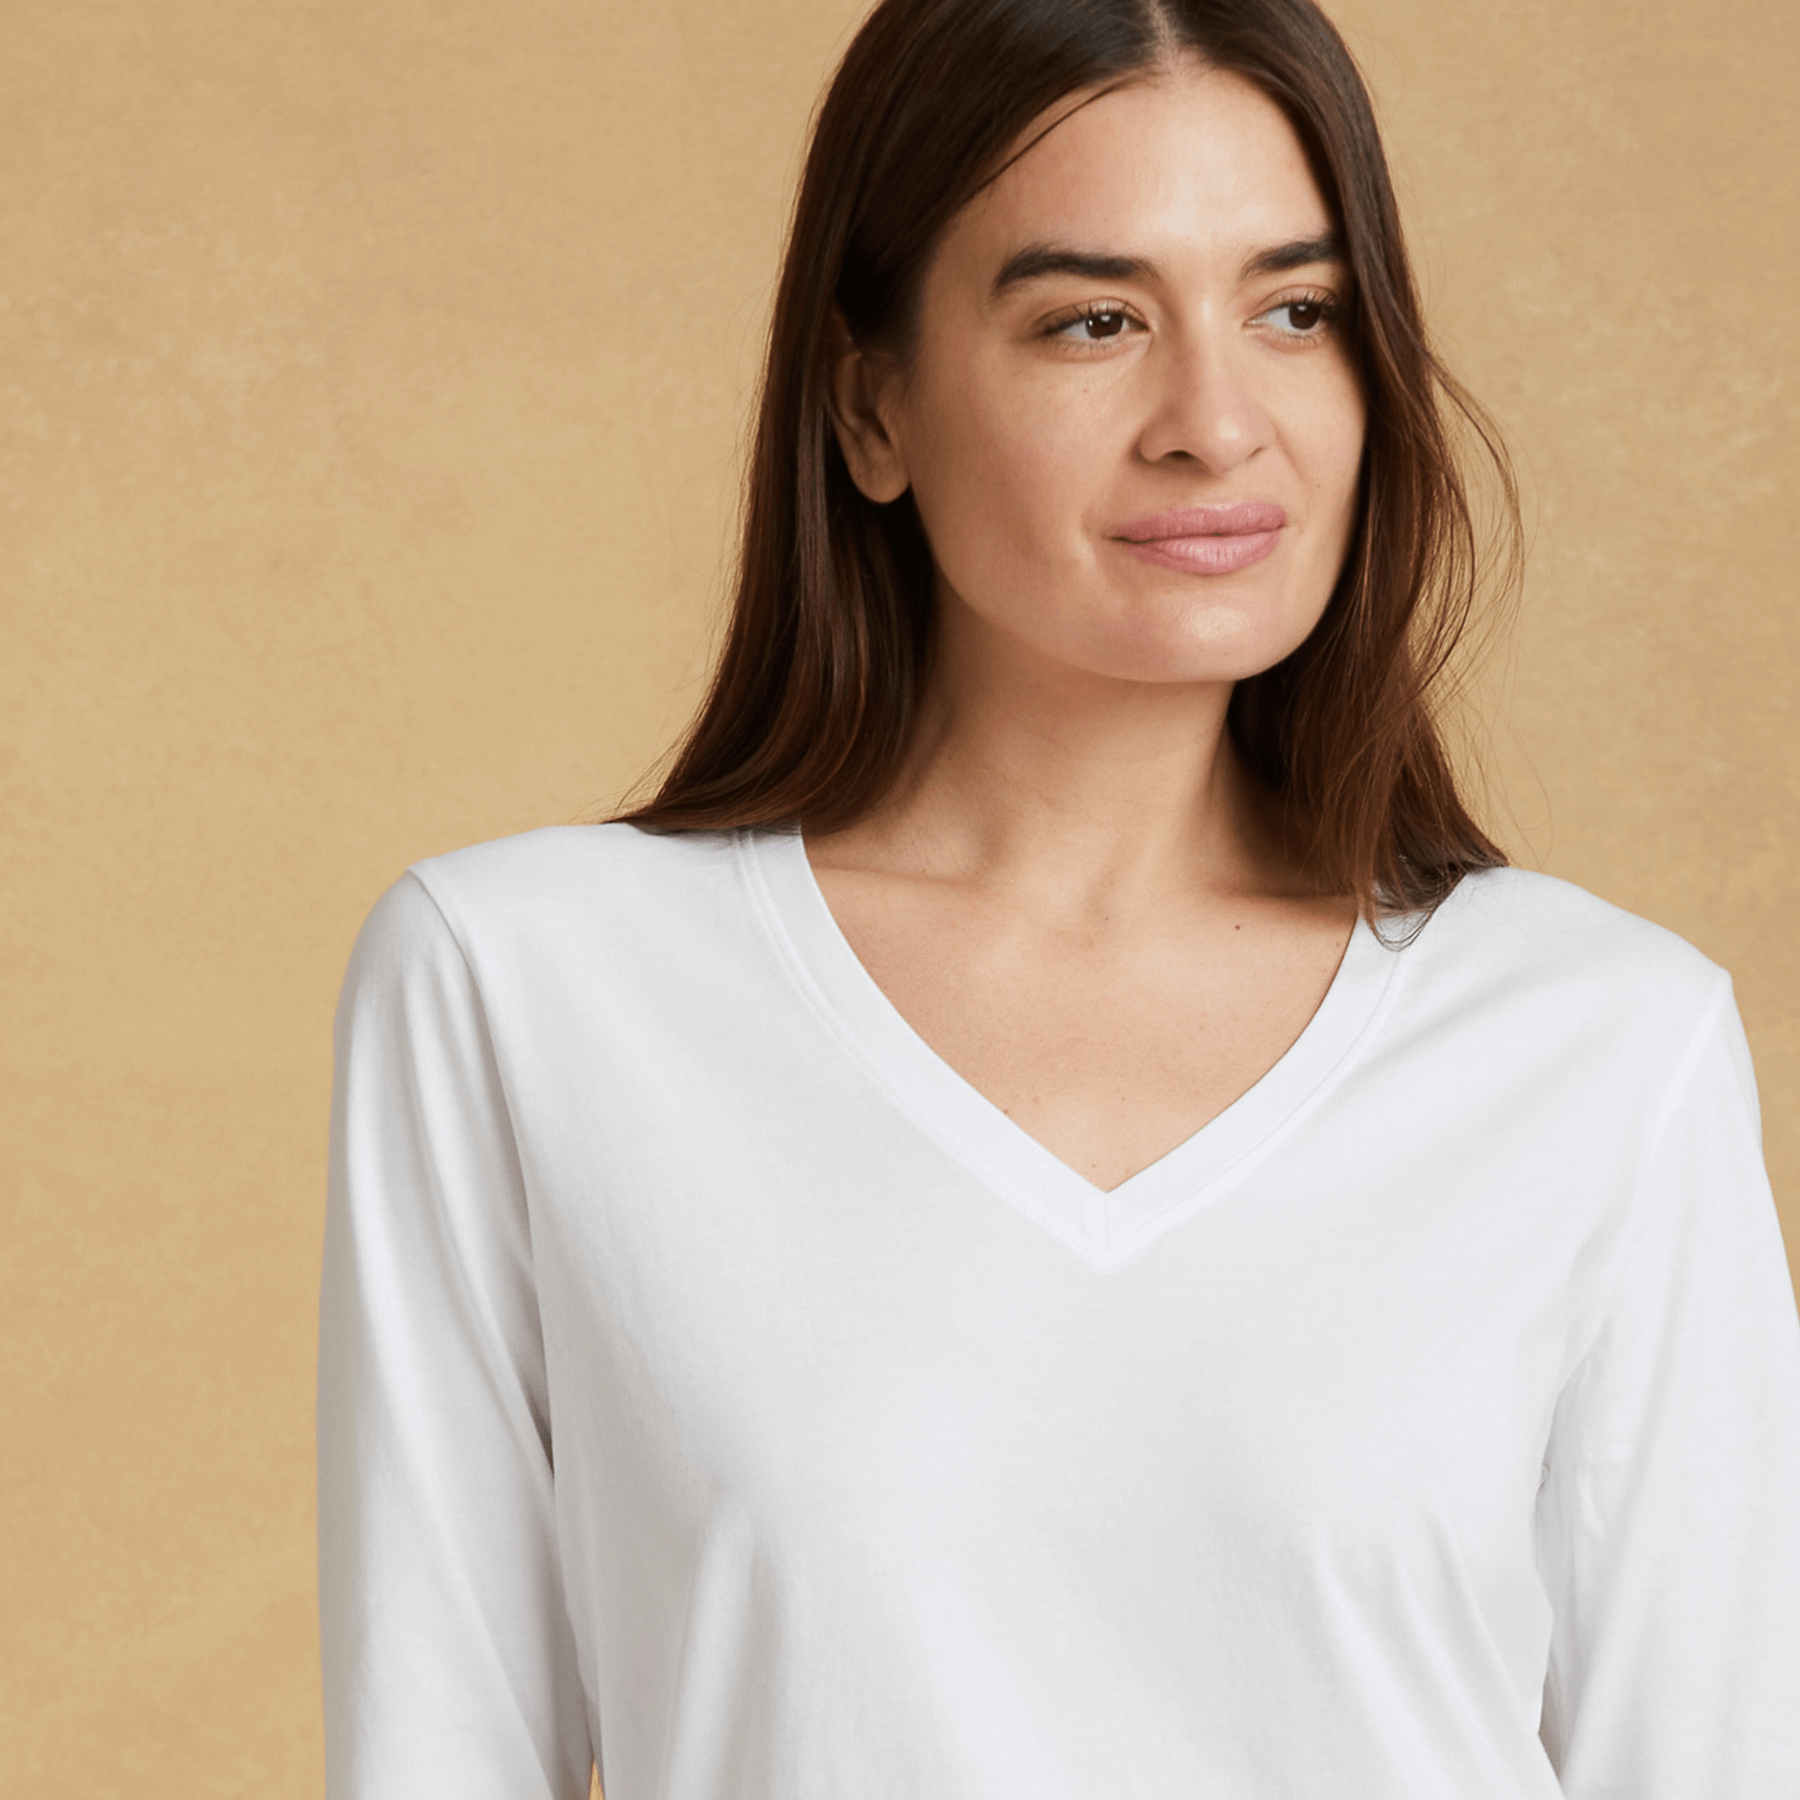 Women's long sleeve t-shirt: breathable and minimalist